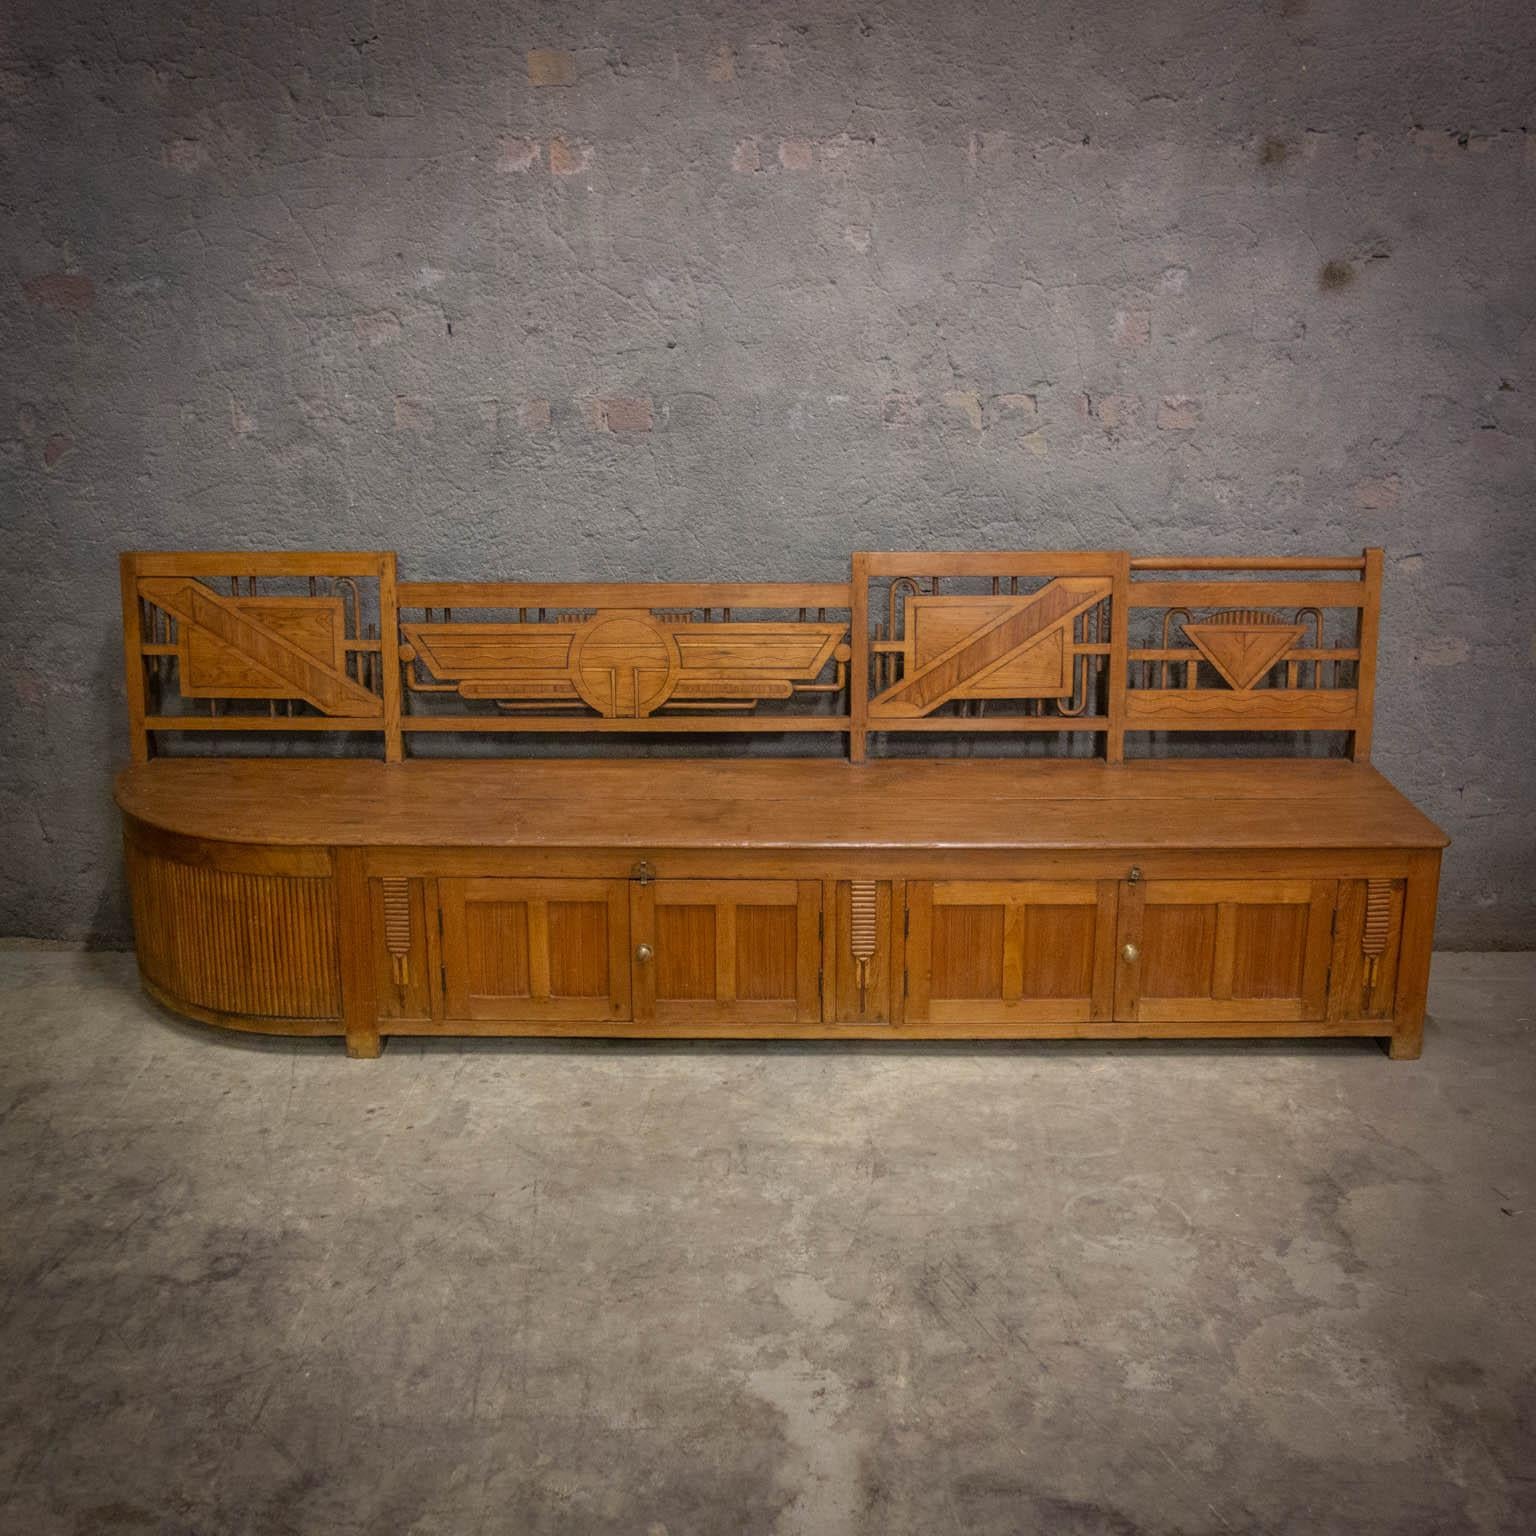 A beautiful Art Deco sofa from Argentina. This sofa comes from a villa of a well-to-do Argentinian, where he has stood for years. Very typical are the Art Deco shapes such as the backrest ornaments. The sofa is not only beautiful to look at, but